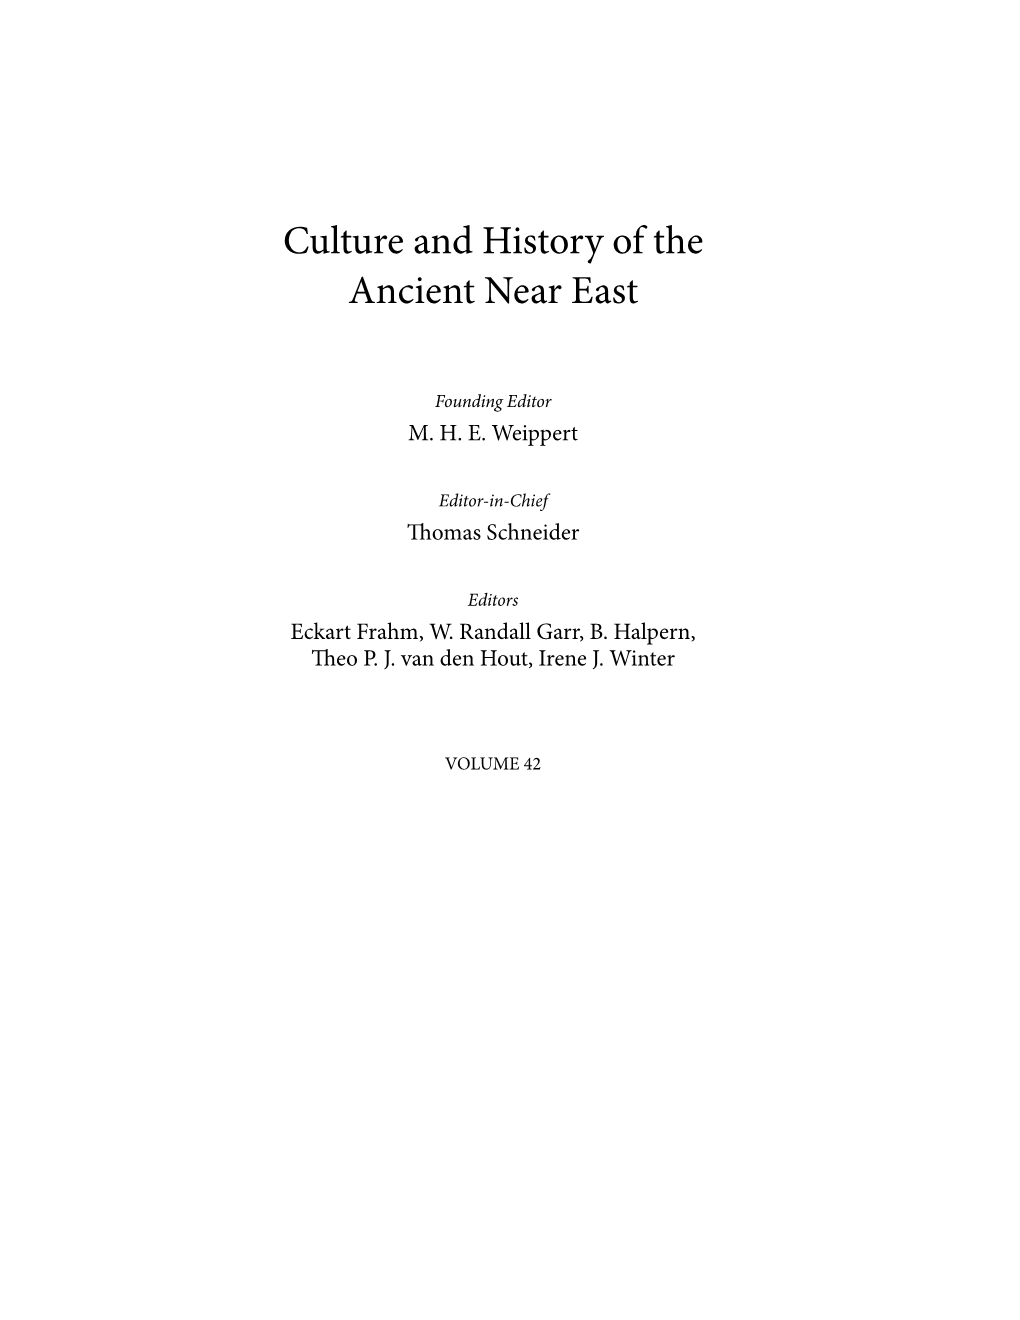 Culture and History of the Ancient Near East